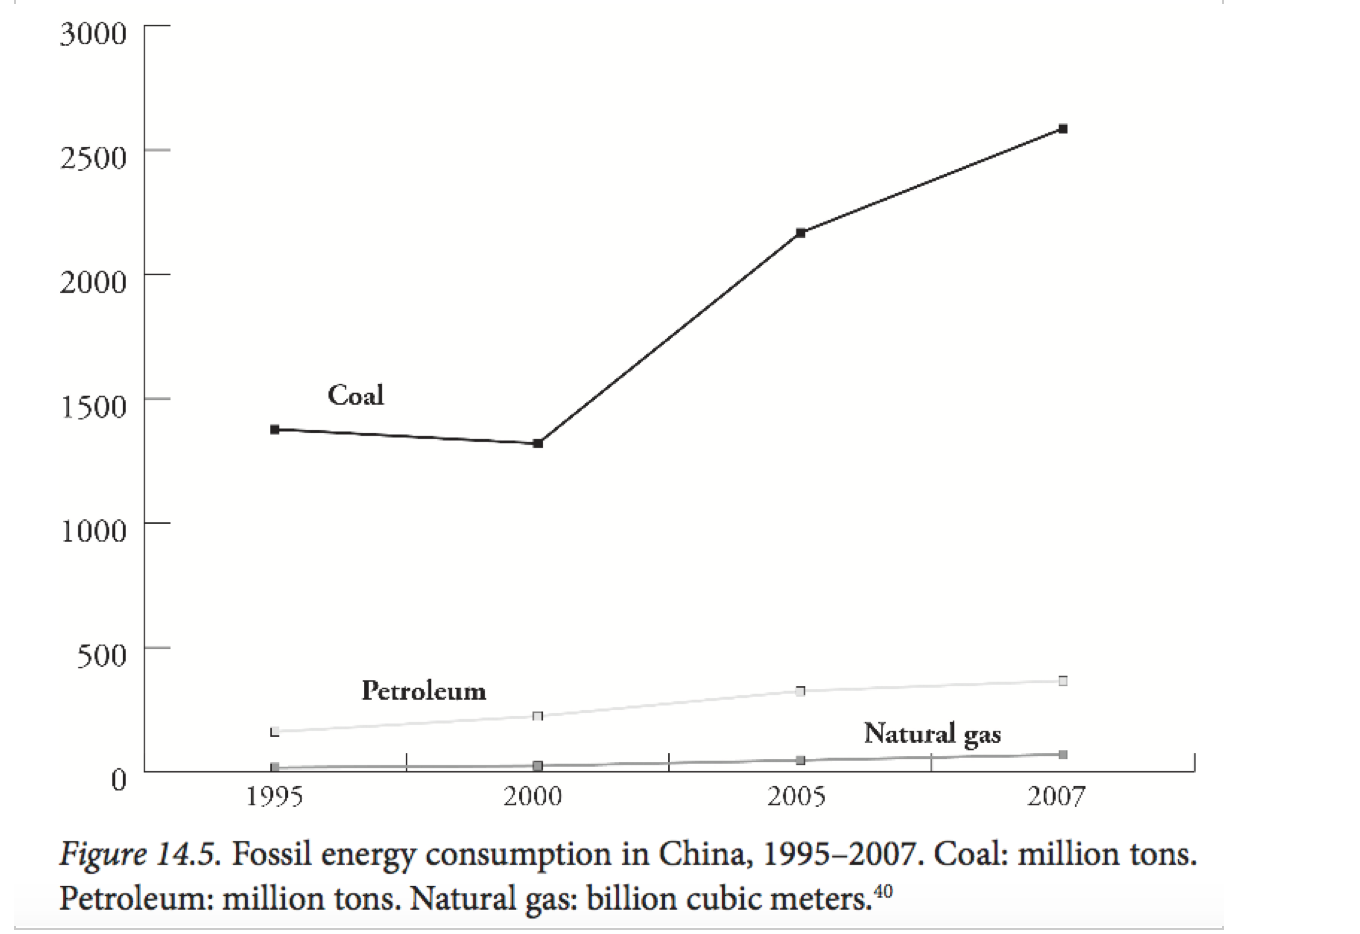 Data from China Energy Statistical Yearbook in Y. Wang, A. Gu and A. Zhang, ‘Recent Developments of Energy Supply and Demand in China, and Energy Sector Prospects through 2030’, EP 39 (2010), 6751.